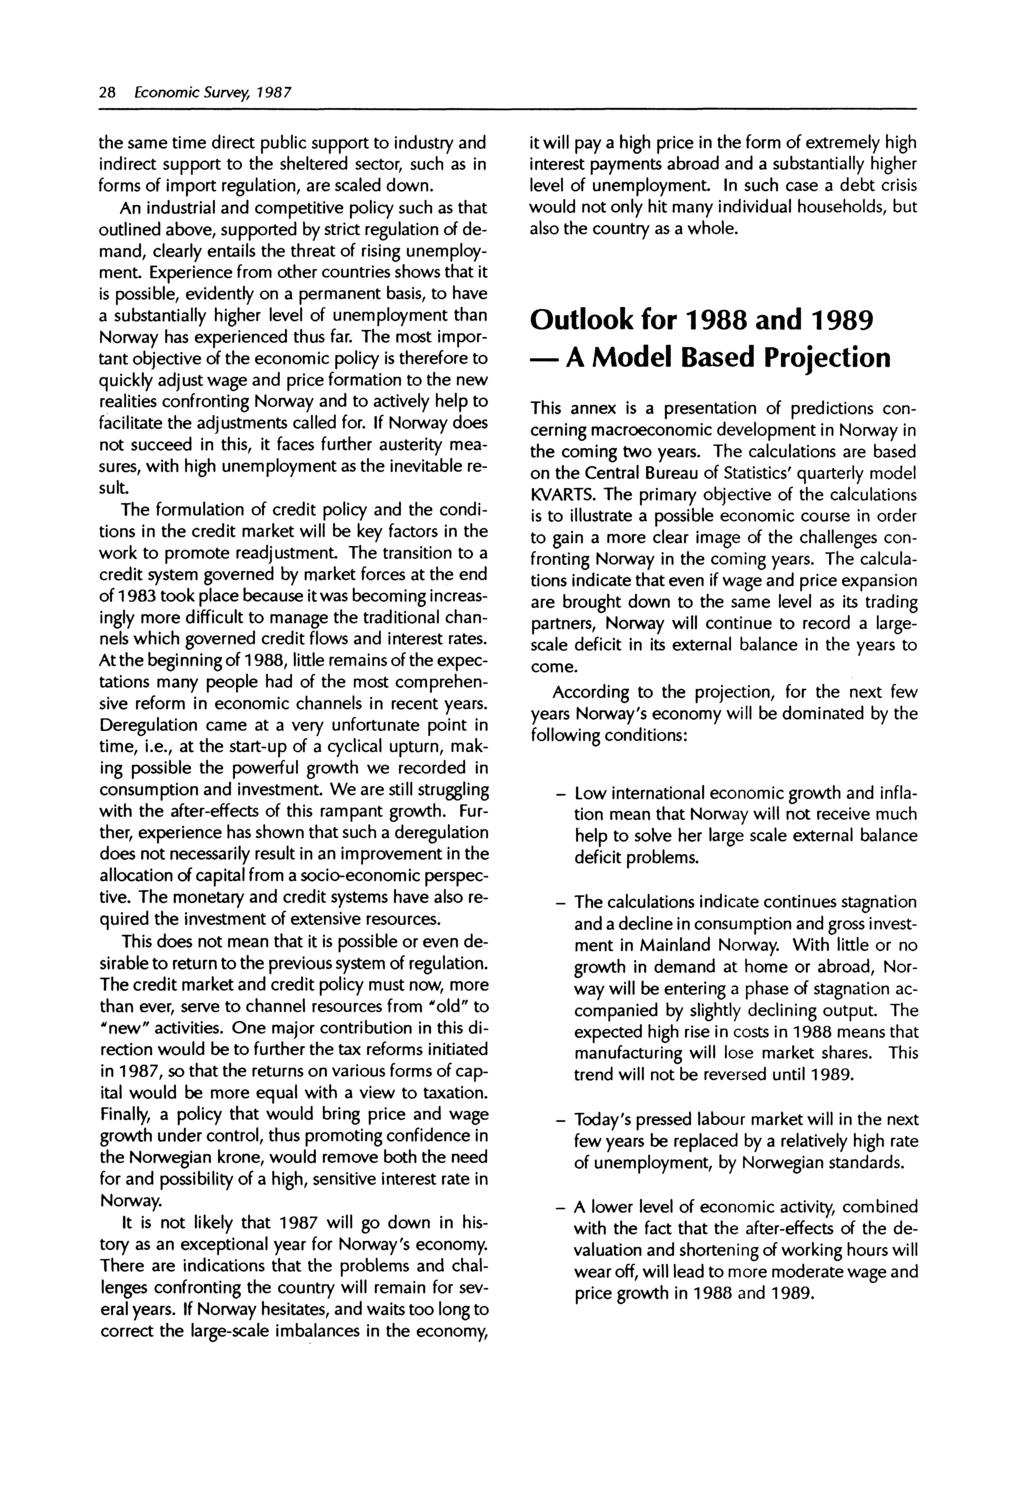 28 Economic Survey, 1987 the same time direct public support to industry and indirect support to the sheltered sector, such as in forms of import regulation, are scaled down.